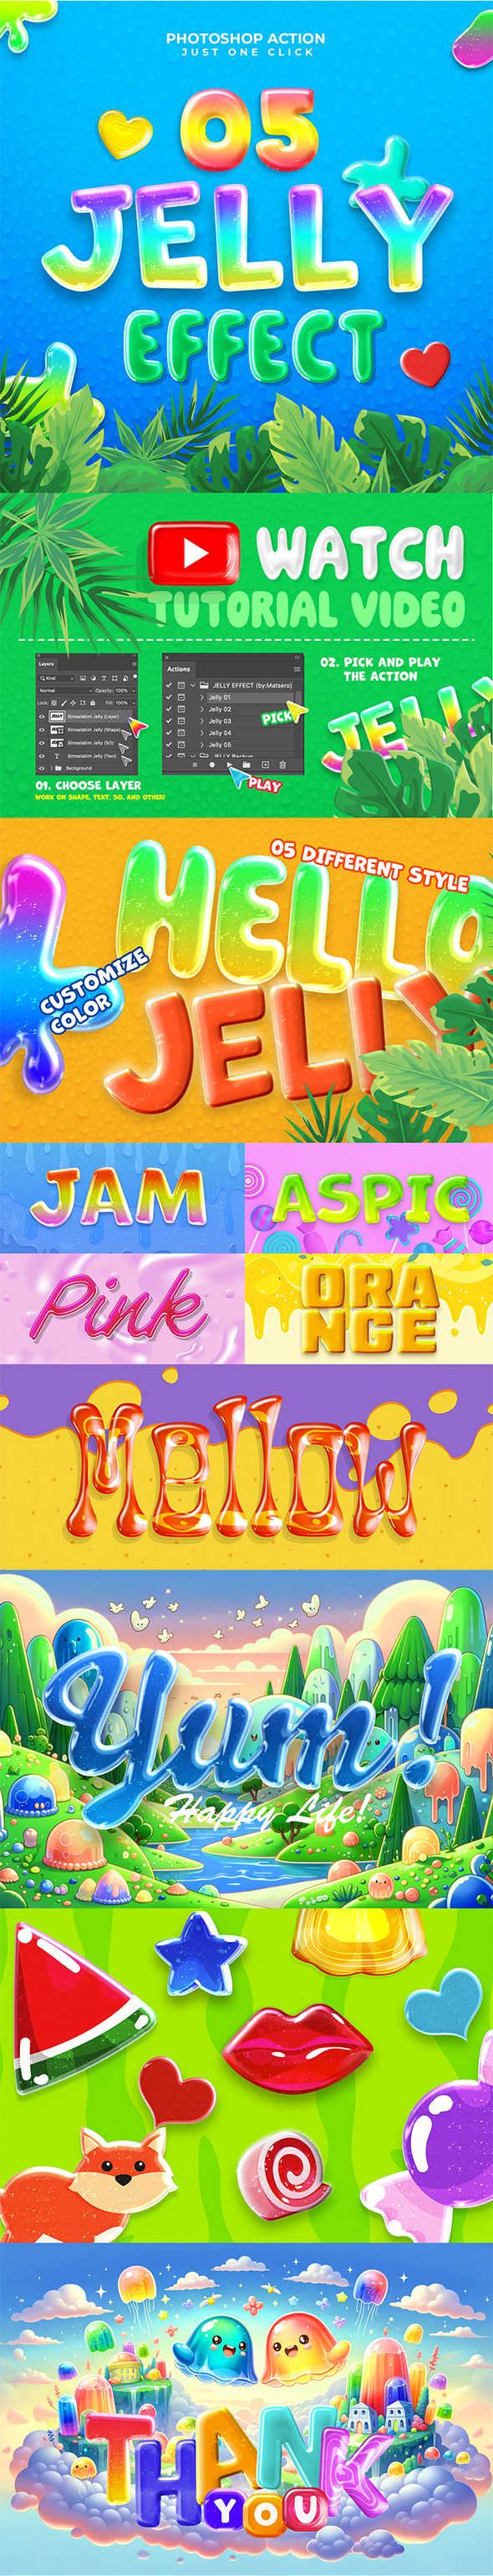 [DOWNLOAD]Jelly Photoshop Action